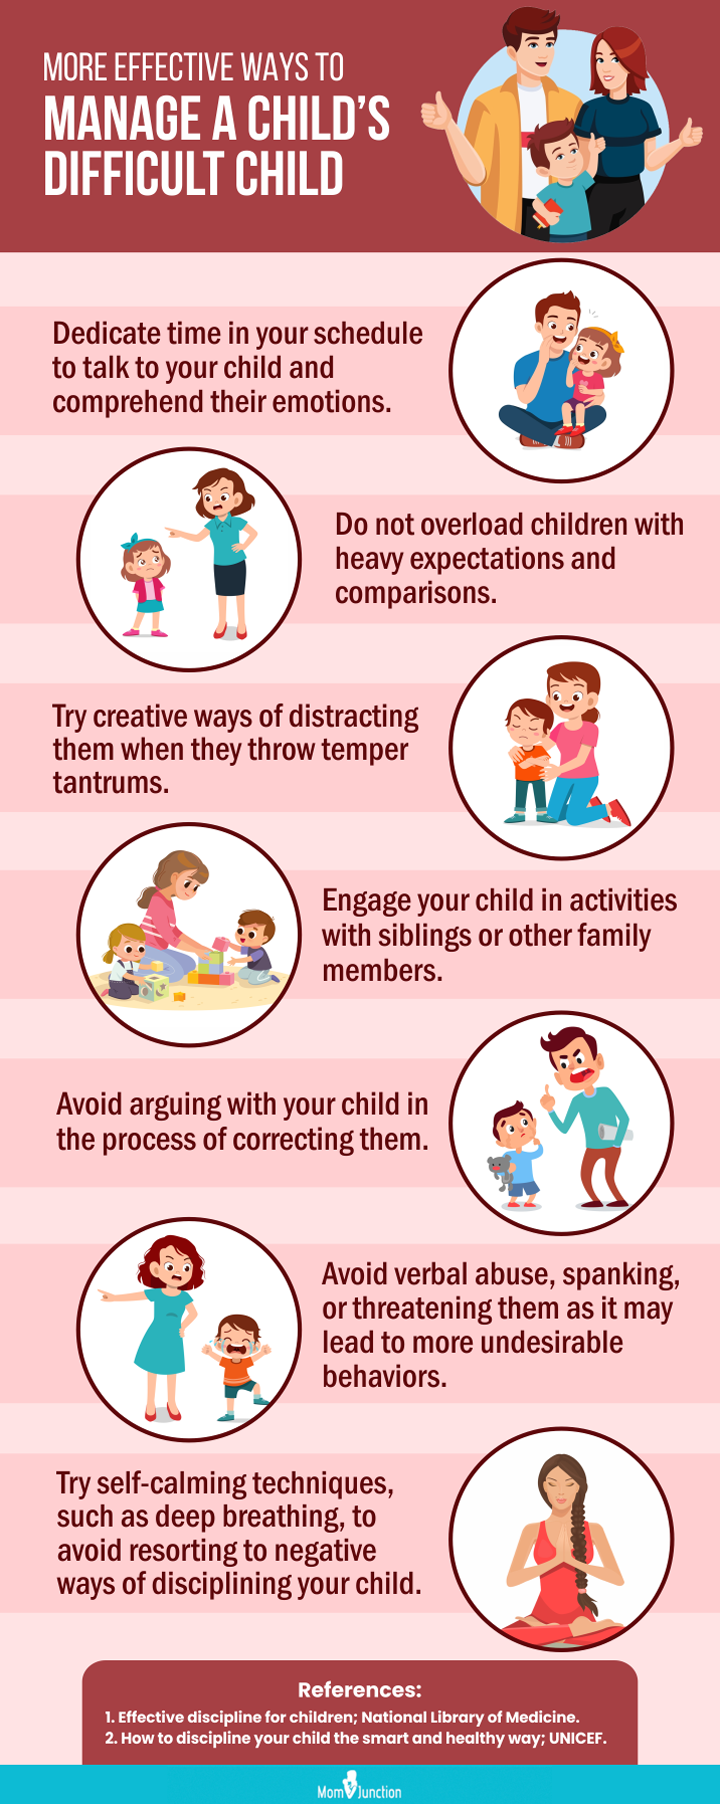 14 Effective Ways To Deal With A Difficult Child's Behavior